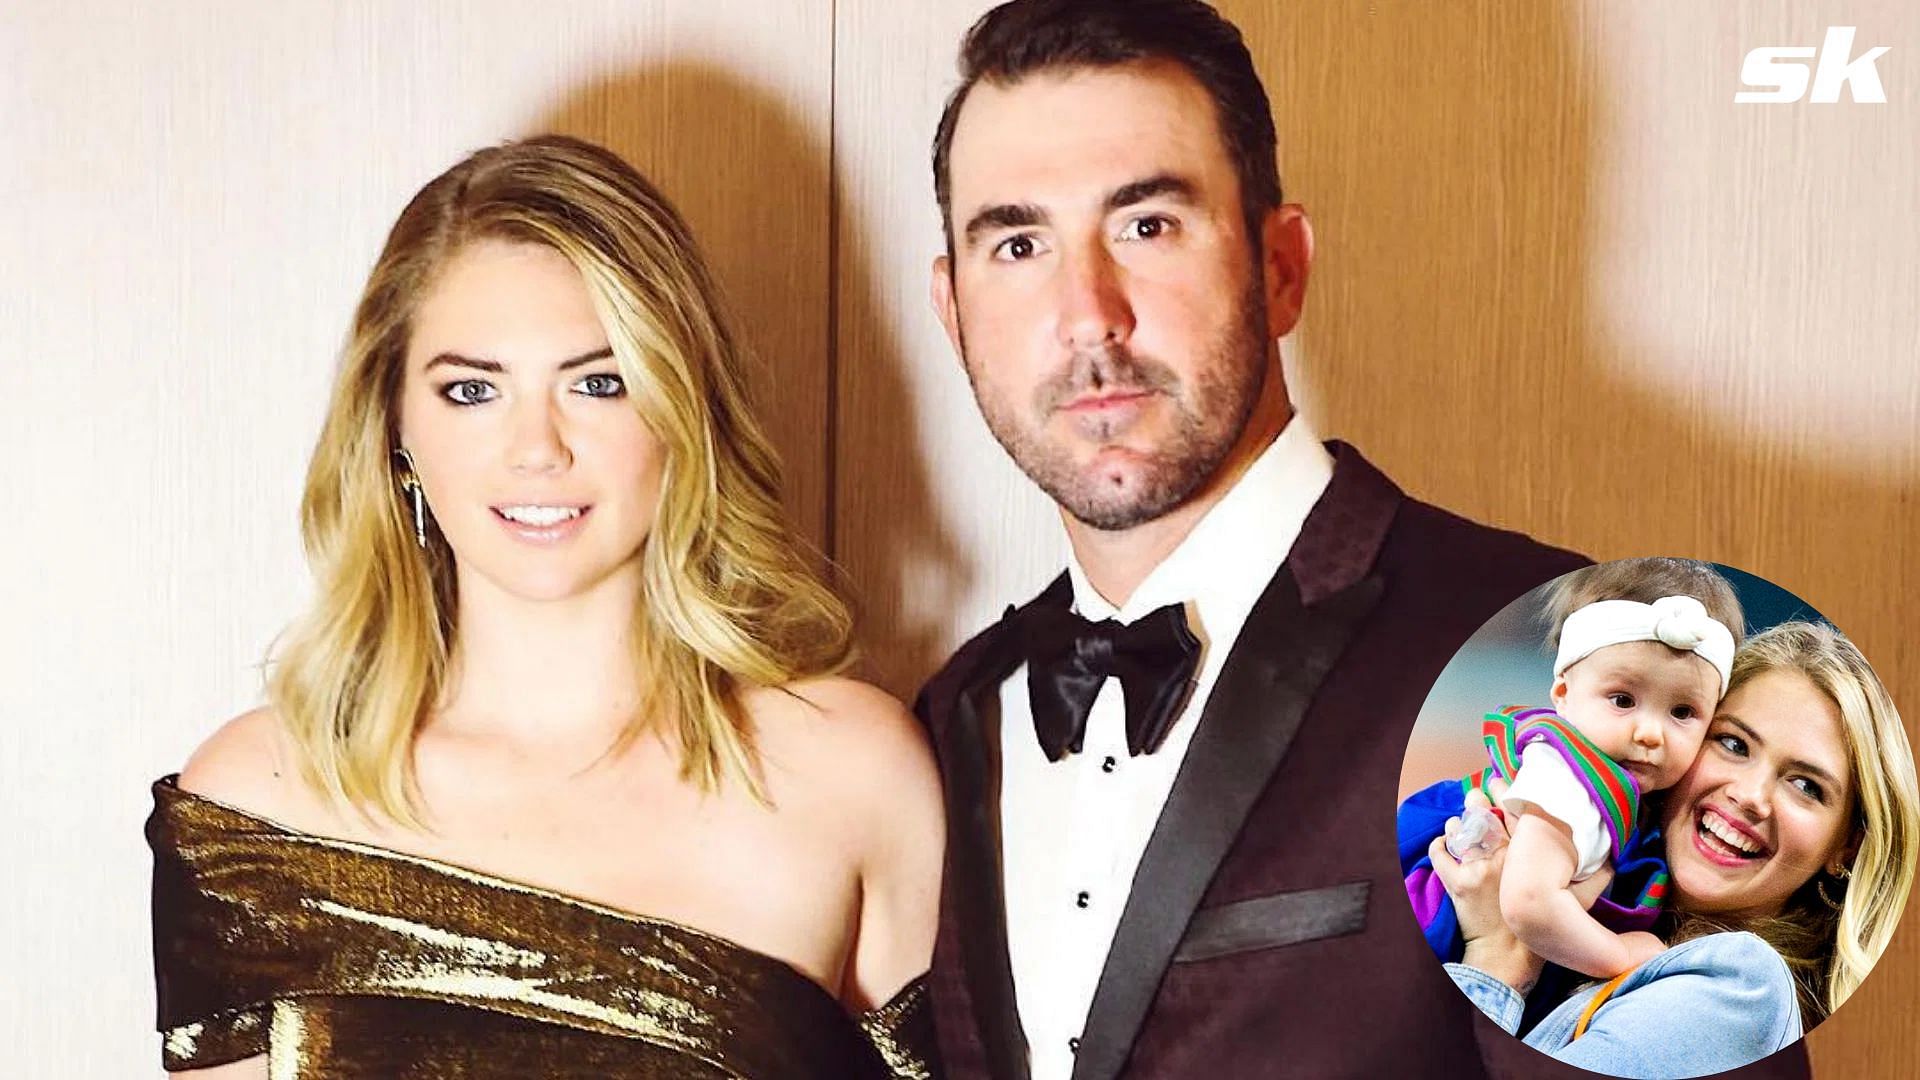 Kate Upton, wife of Houston Astros starting pitcher Justin Verlander, and  daughter Genevieve